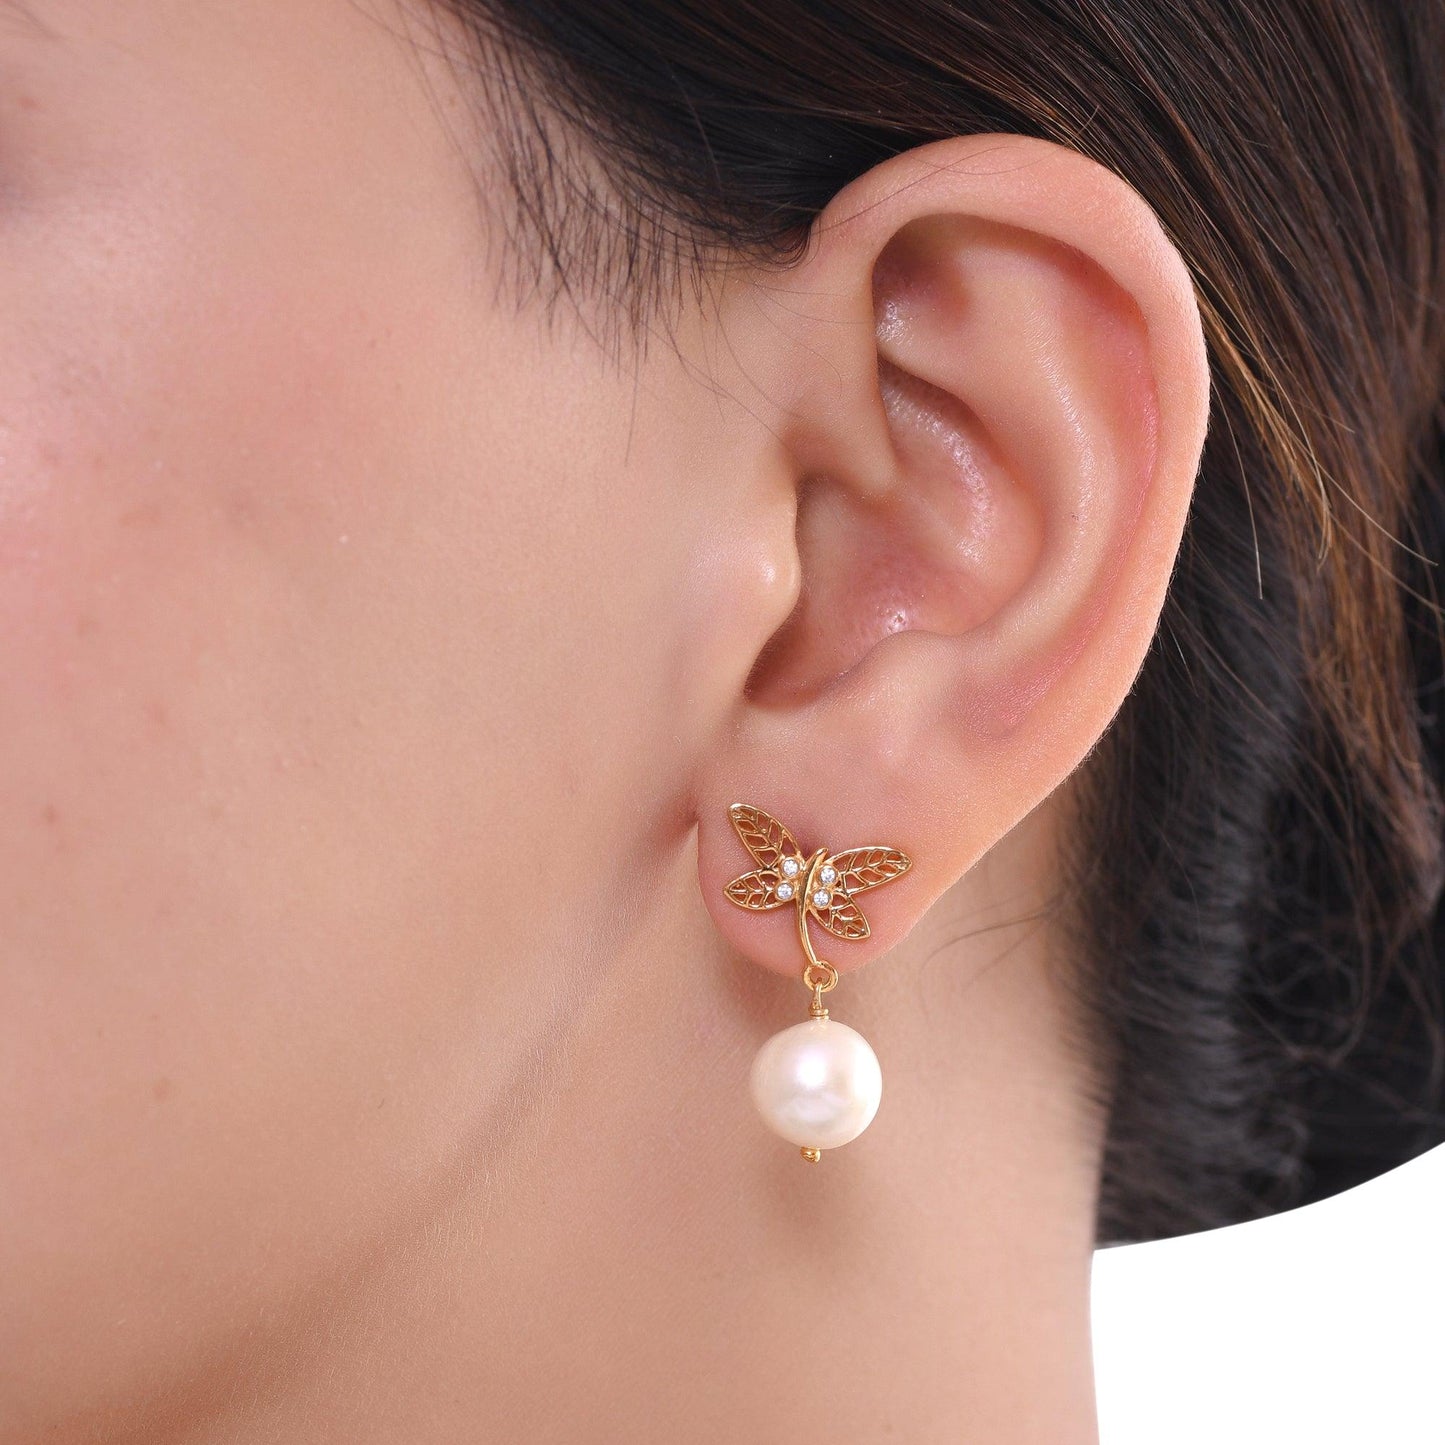 Exquisite Butterfly Pearl Drop Silver Earring - From Purl Purl